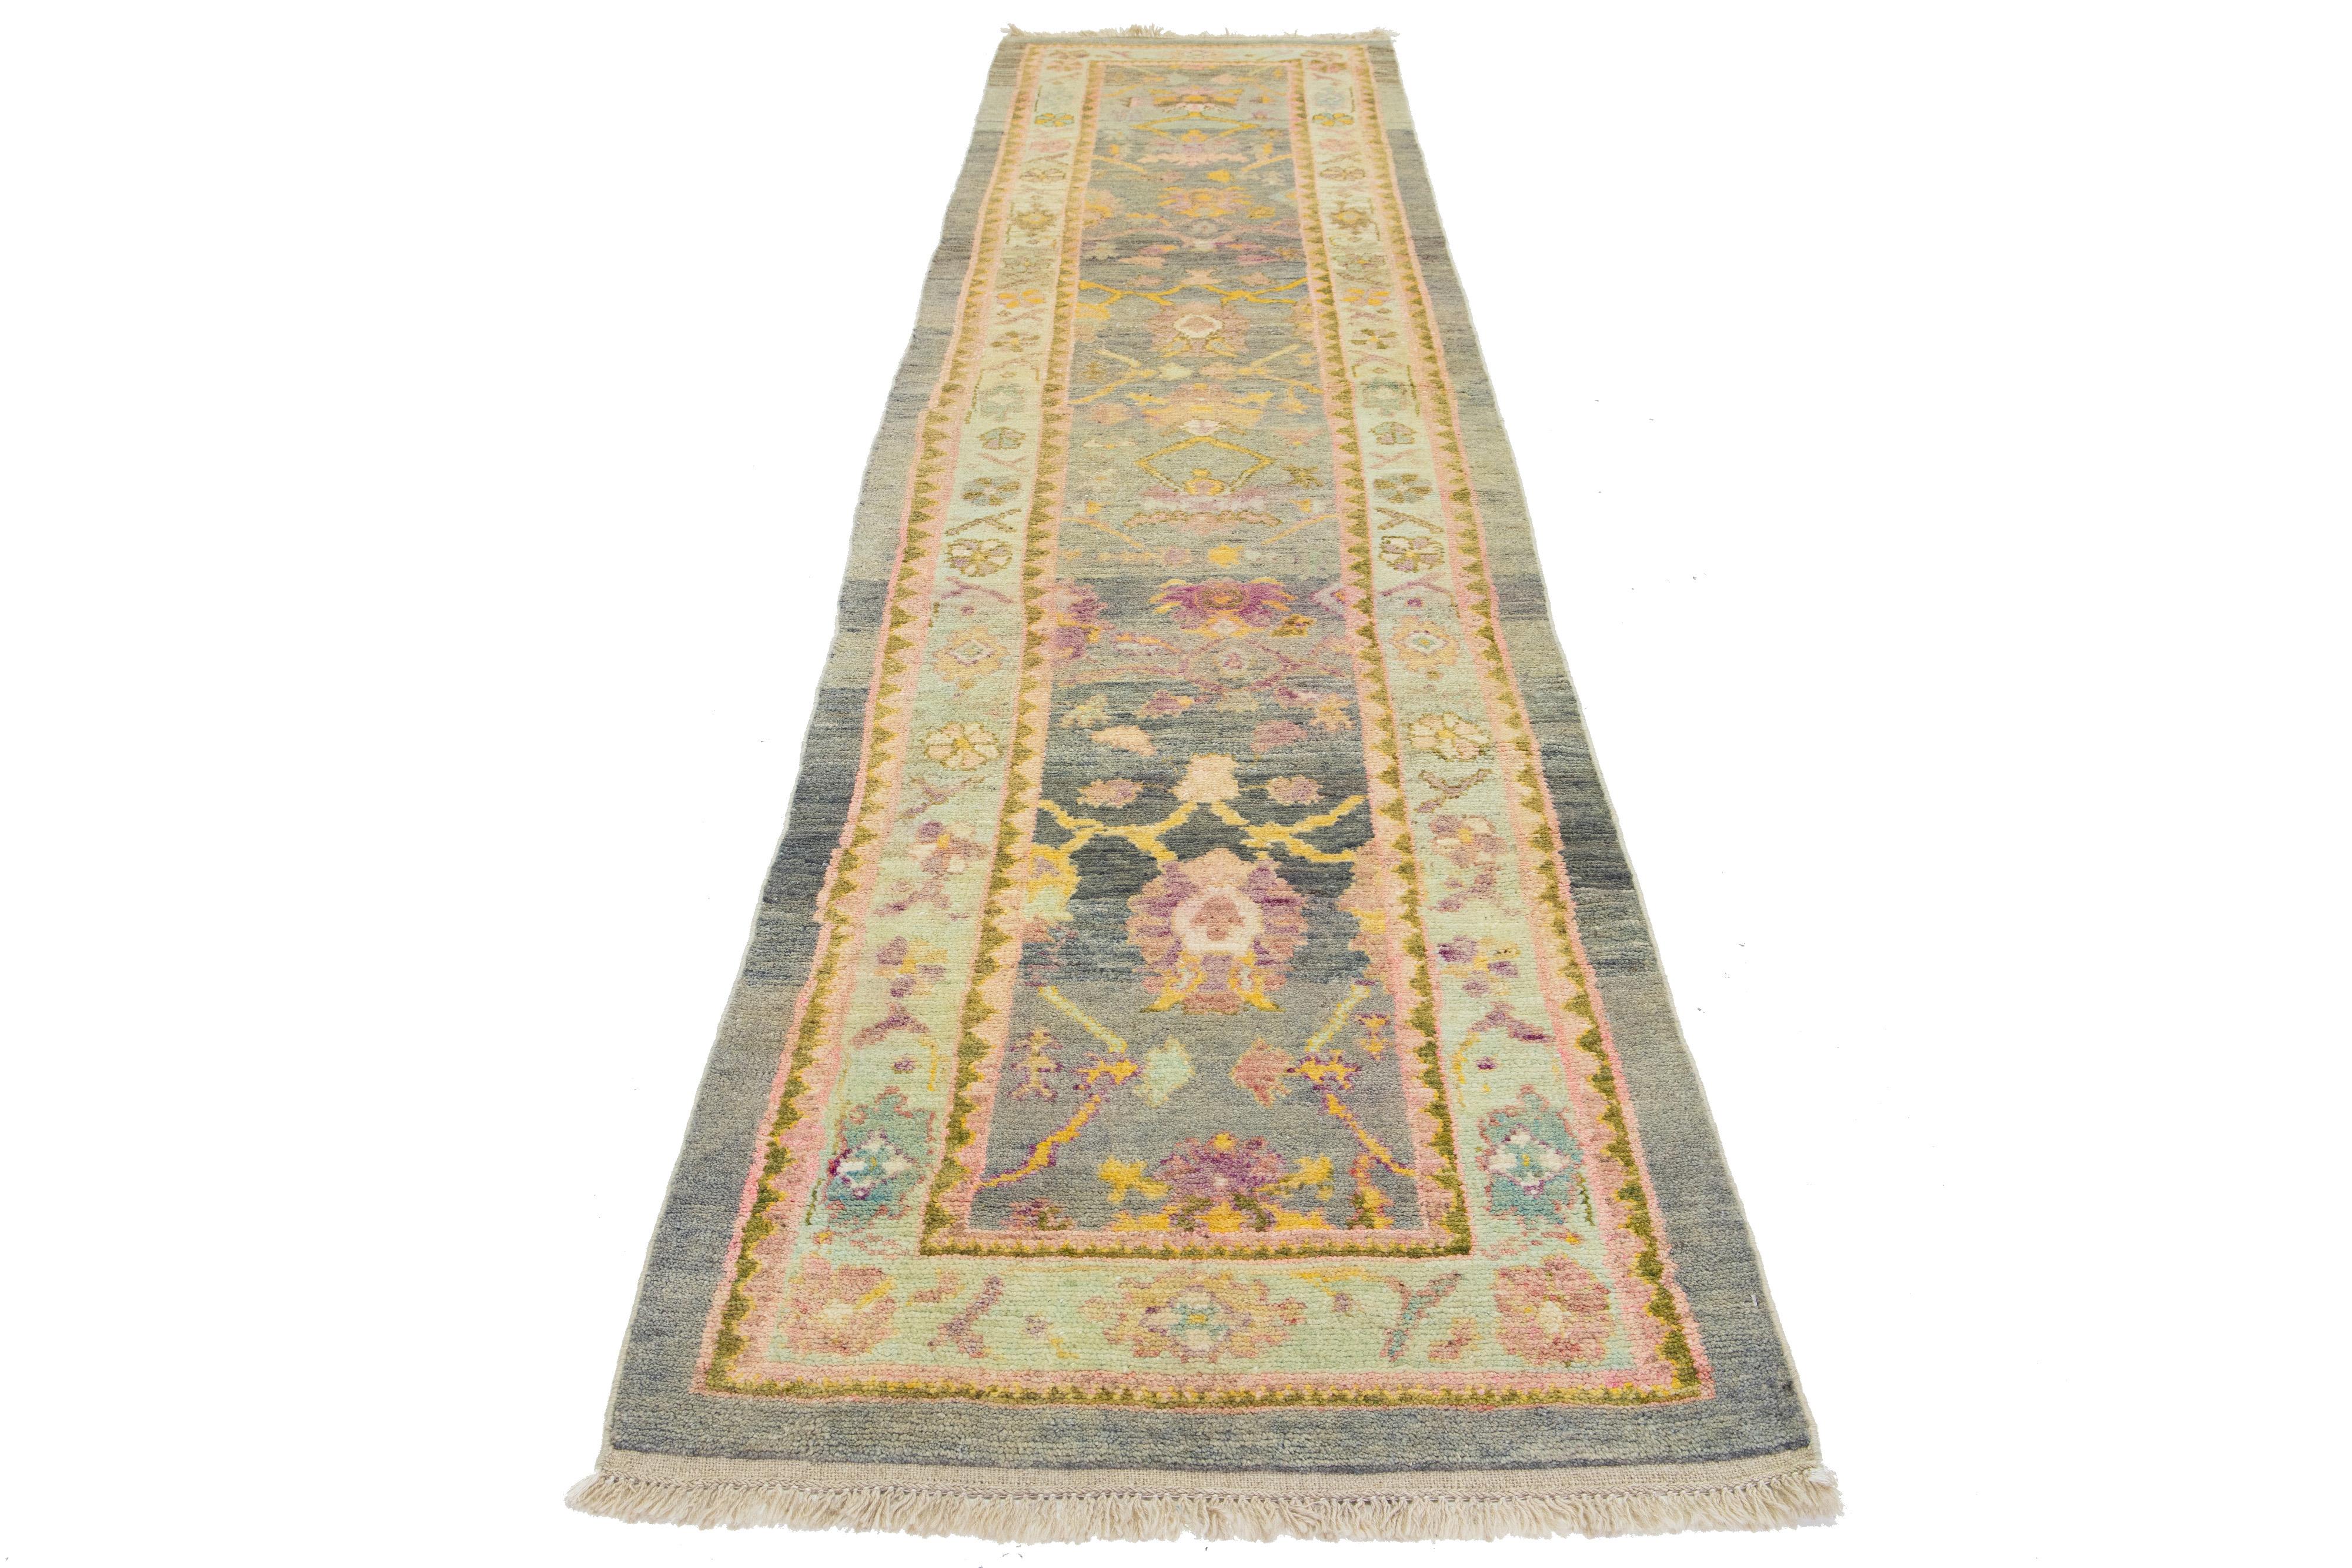 This beautiful modern Oushak hand-knotted wool rug features a gray color field. It is a Turkish piece with stunning accent colors of blue, yellow, pink, and brown, all woven into a gorgeous all-over floral design.

This rug measures 3' x 13'1